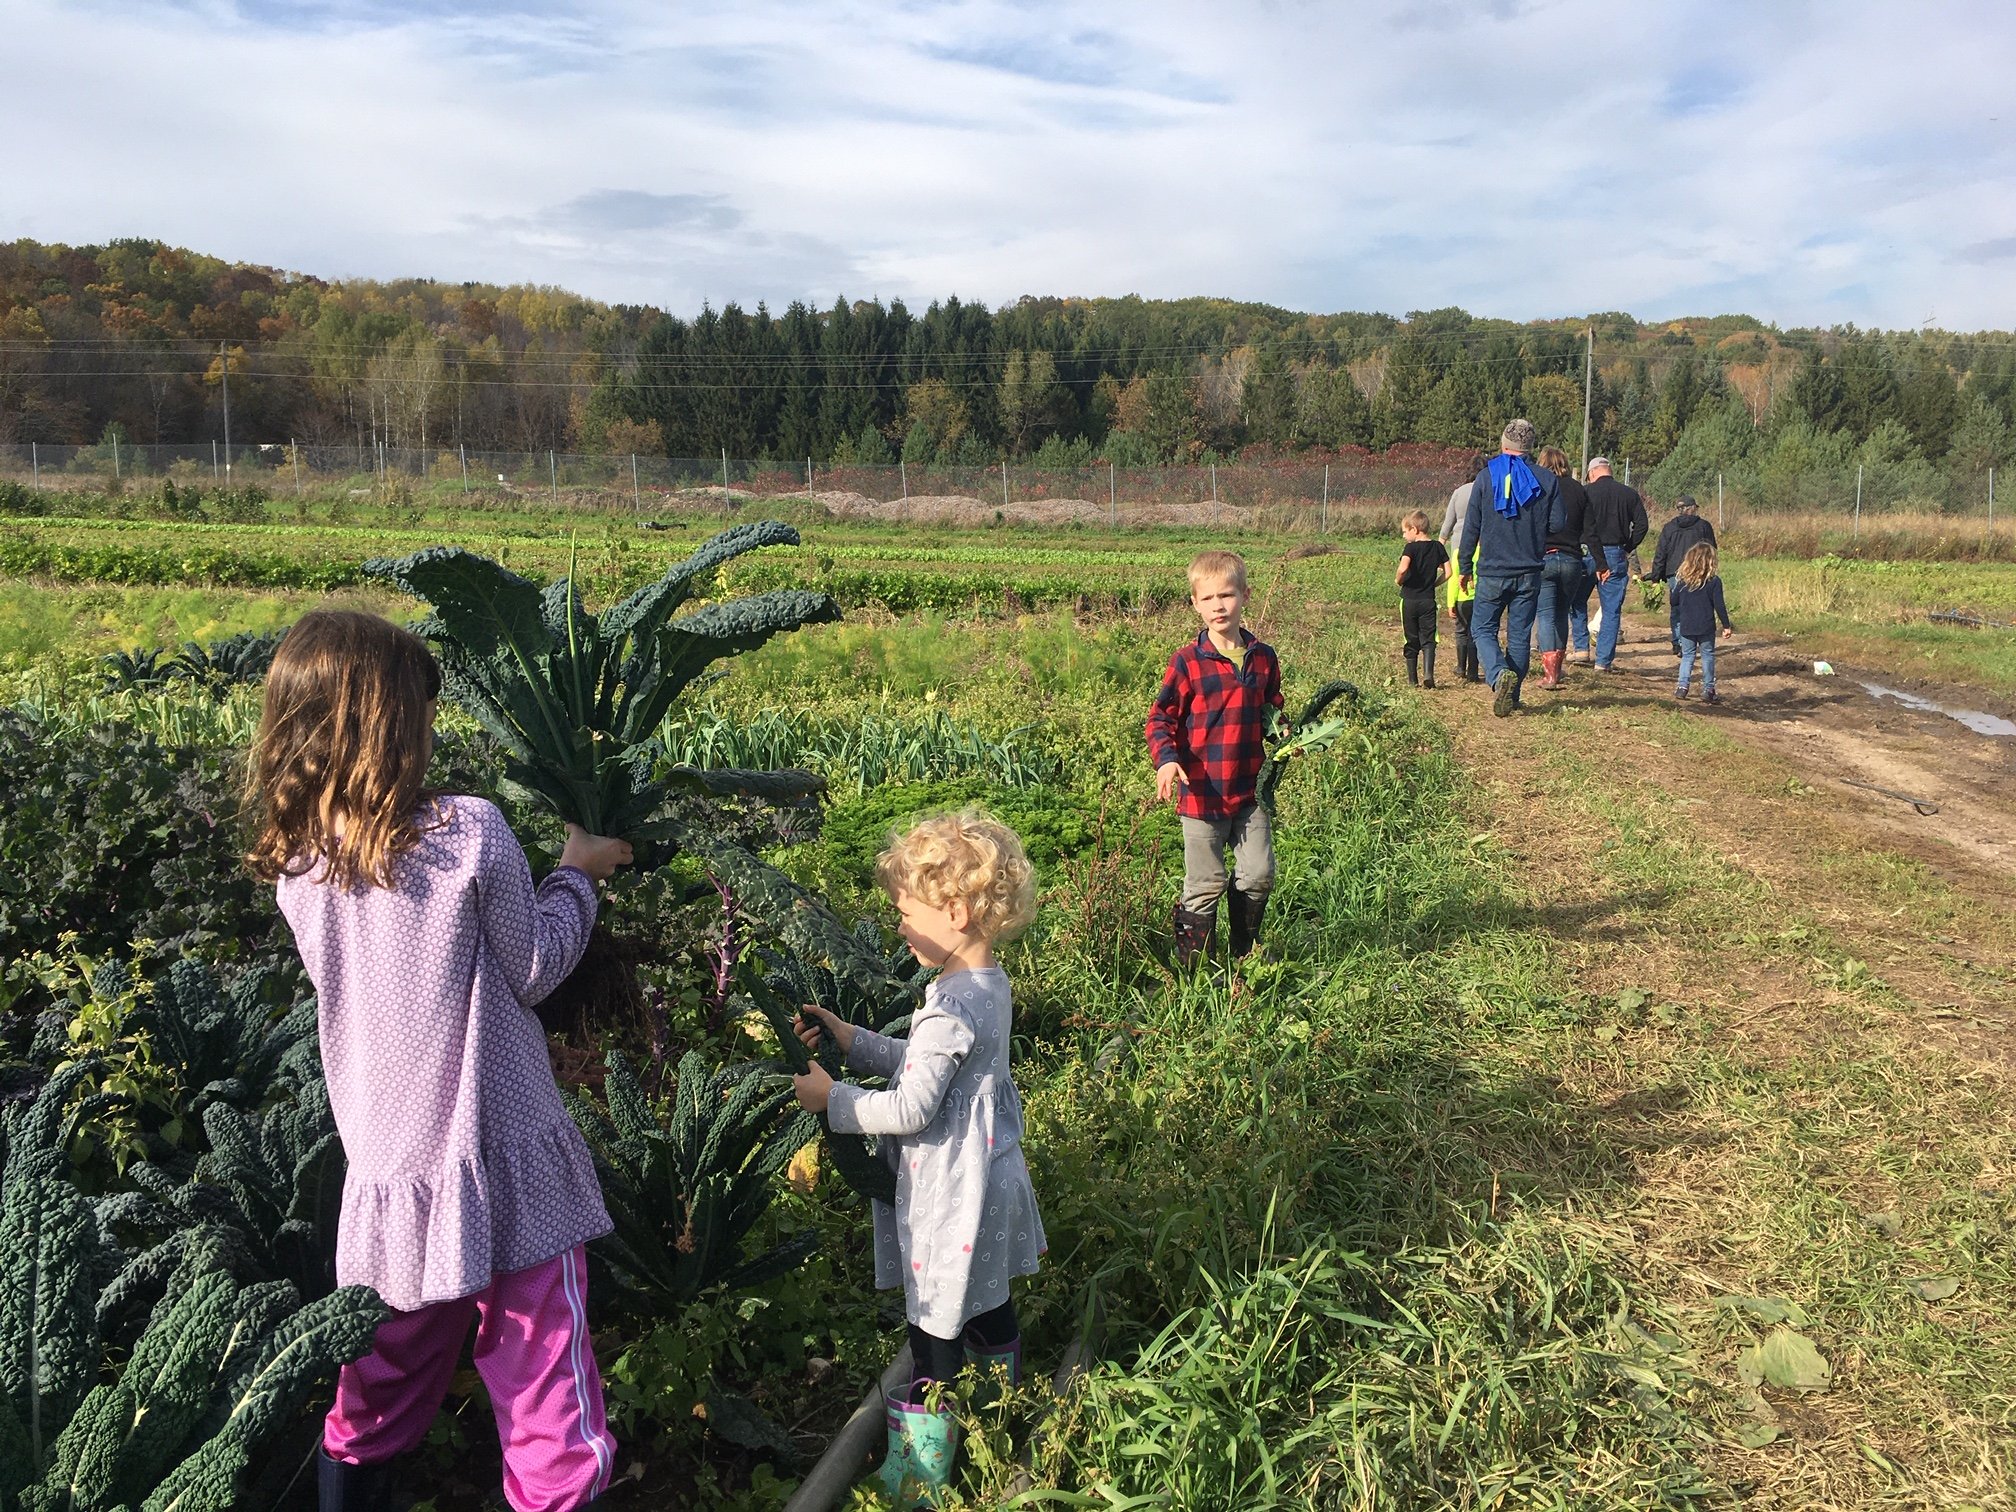 Previous Happening: Farm Happenings for October 25, 2019